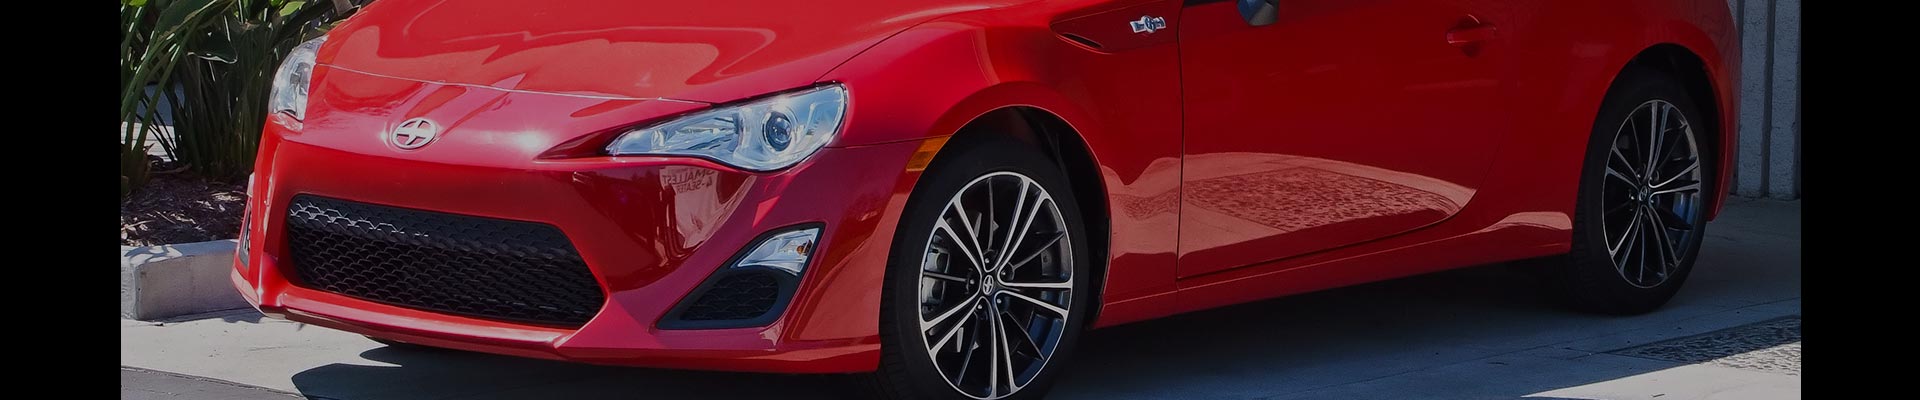 Shop Replacement and OEM 2015 Scion FR-S Parts with Discounted Price on the Net